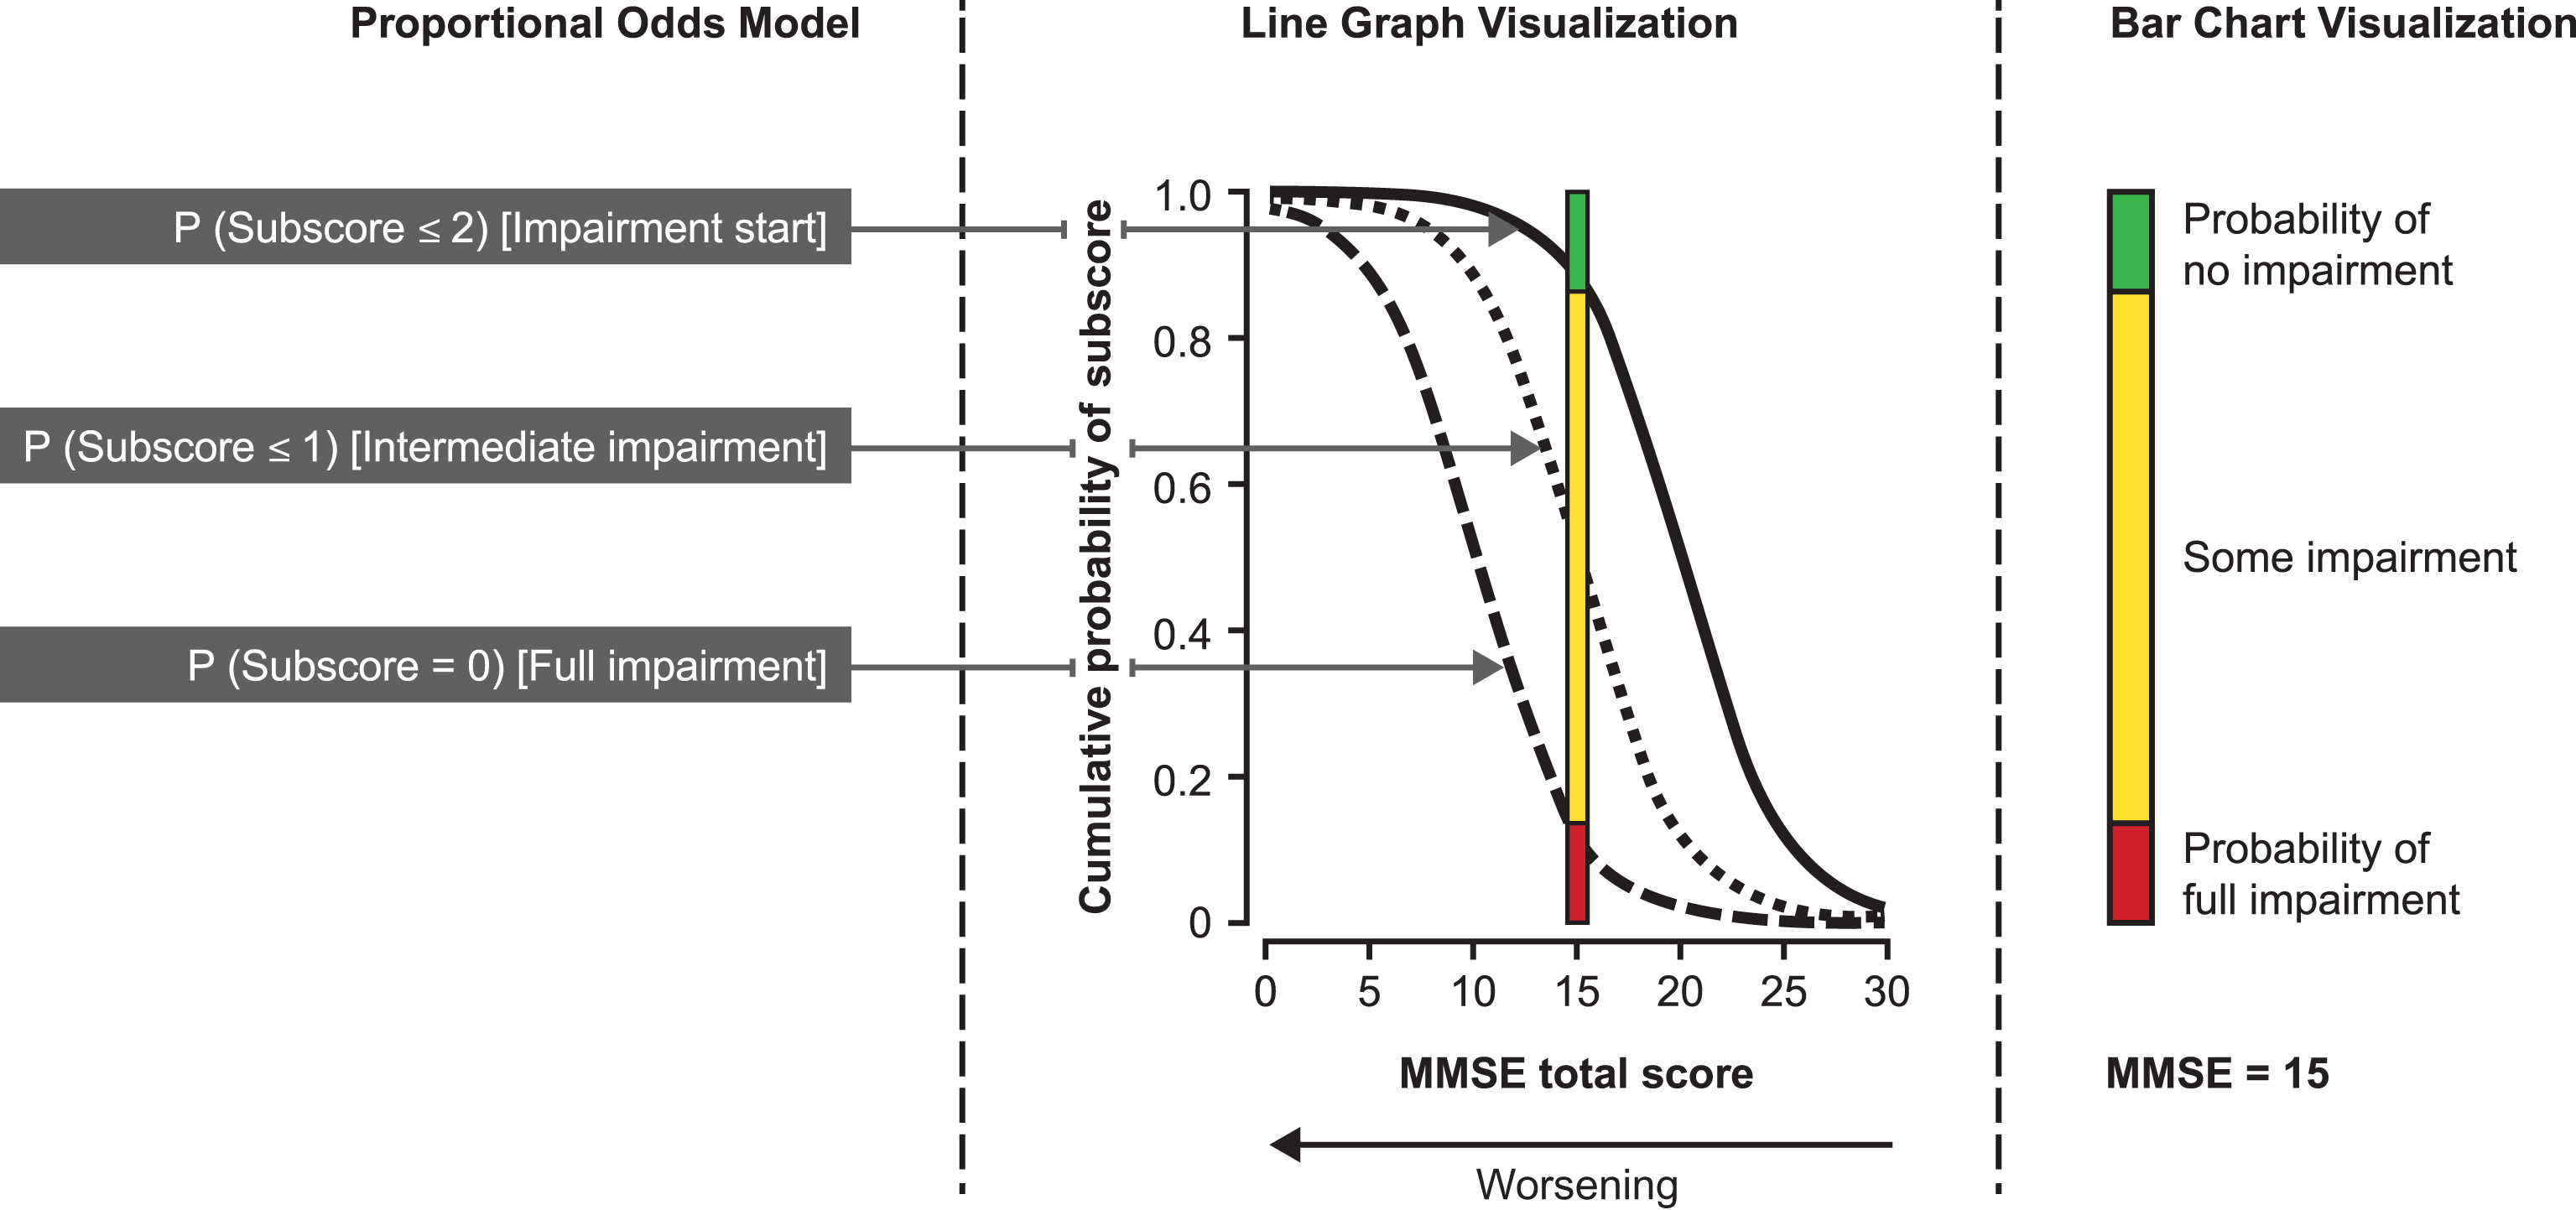 Proportional Odds Model (POM) illustration for an MMSE subscore ranging from 0 (complete impairment) to 3 (no impairment). To understand the POM, consider an MMSE subscore ranging from 0 to 3. A logistic regression could be used to estimate the probability of the subscore being = 0 across the different MMSE total score values (leftmost sigmoid curve). Another logistic regression model might be set up to estimate the probabilities for a subscore being ≤ 1 (middle curve). Finally, a logistic regression model may estimate the probability of impairment start (rightmost curve). The POM simultaneously fits those three logistic curves respecting their natural order and can thus be seen as a sandwich of logistic regression models. These probabilities at each MMSE total score can be visualized as colored bar charts for development of an animation that follows the sequence of what happens for each subscore starting at MMSE total score = 26 and counting down to MMSE total score = 0. The example in the figure shows the probability of no, some, and full impairment at MMSE total score = 15.